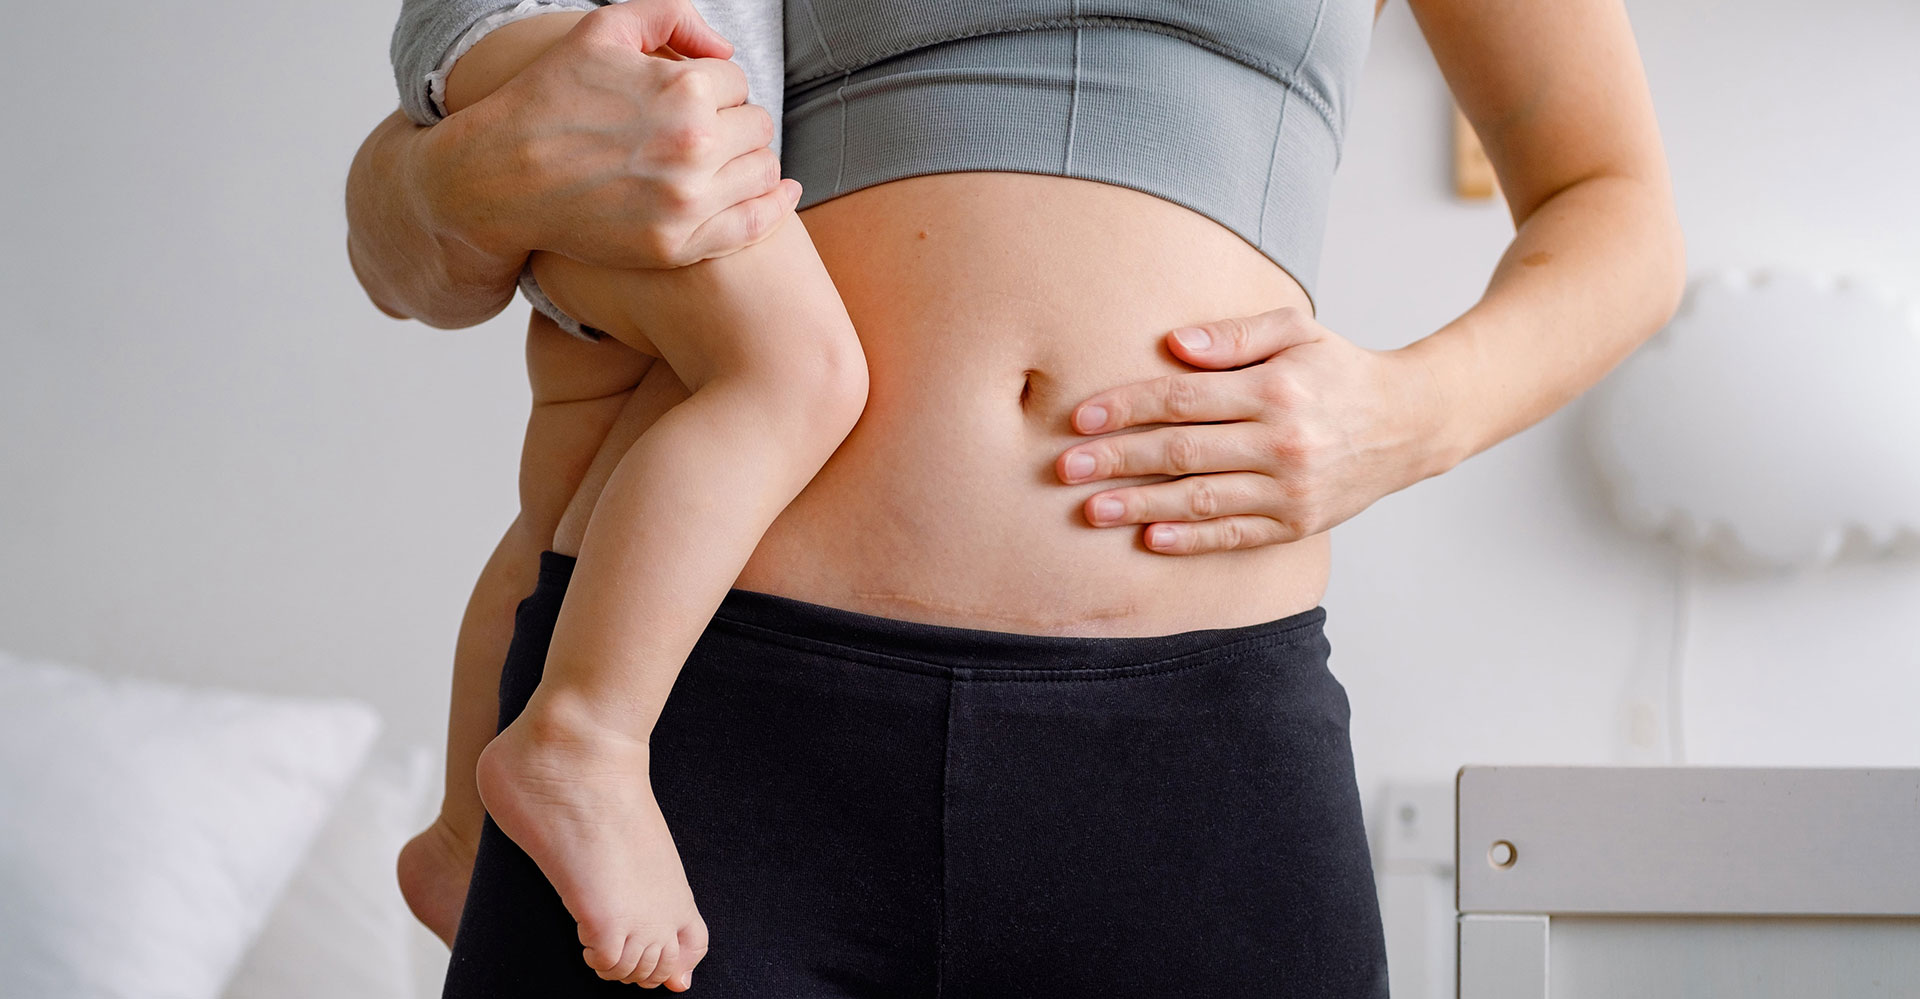 woman with c section scar holding baby Complete Pilates